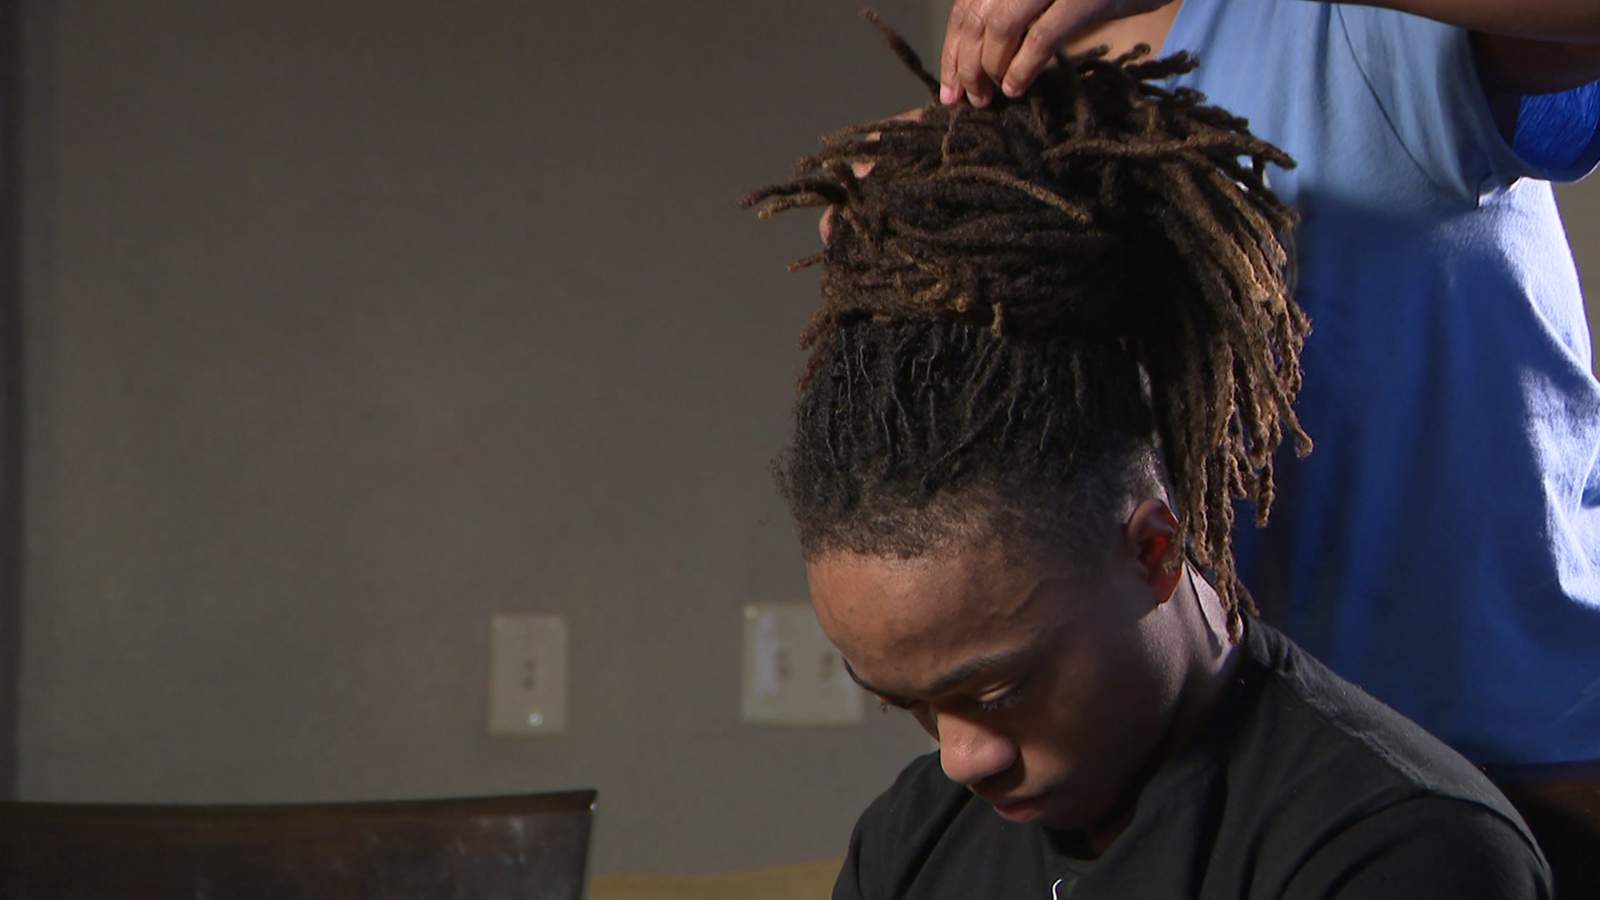 From school suspension to the Oscars: See the journey of a Houston-area student at the center of the dreadlock controversy